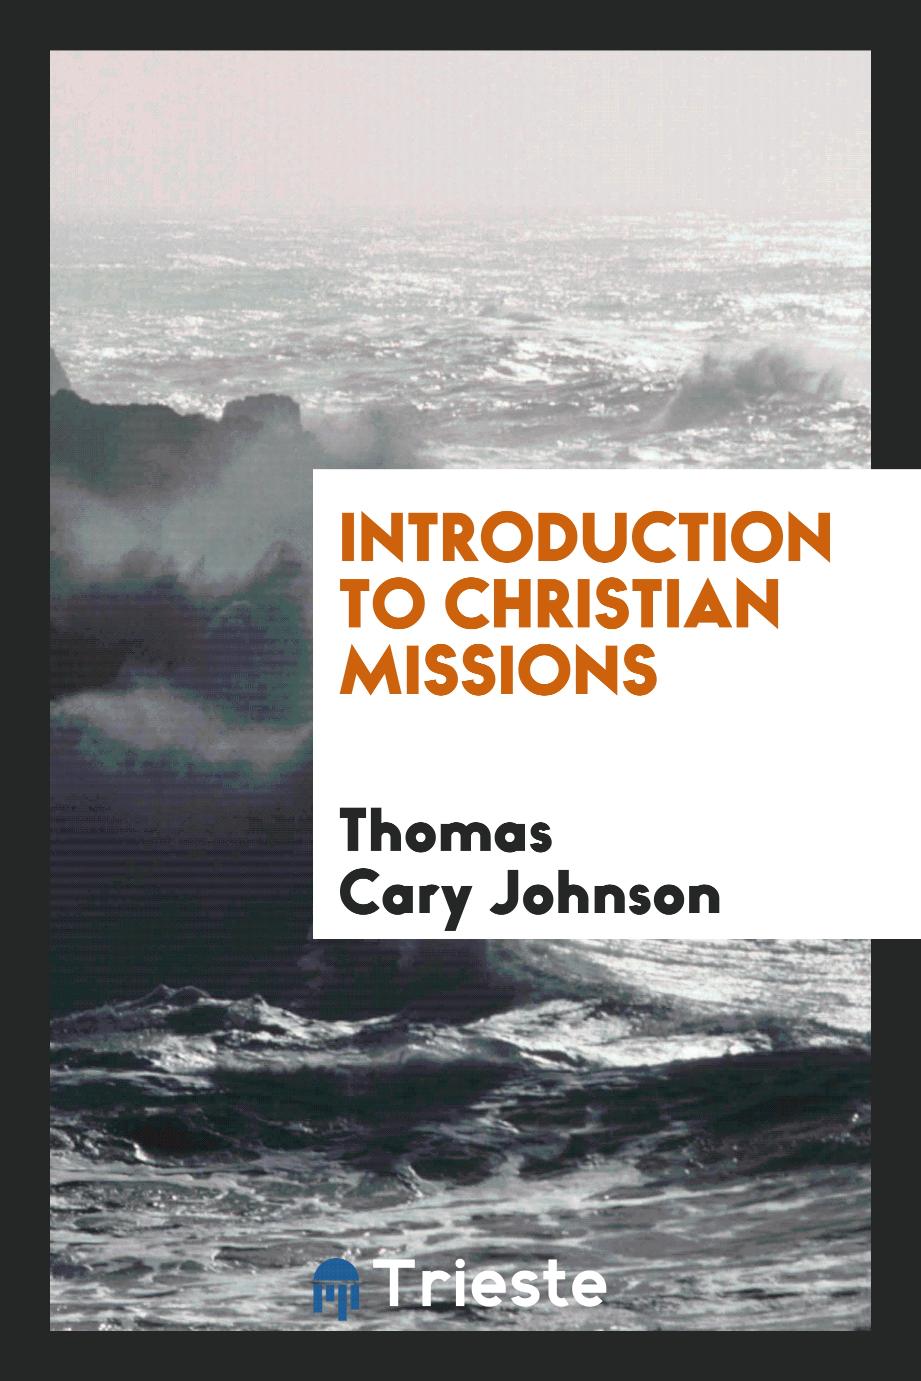 Introduction to Christian missions